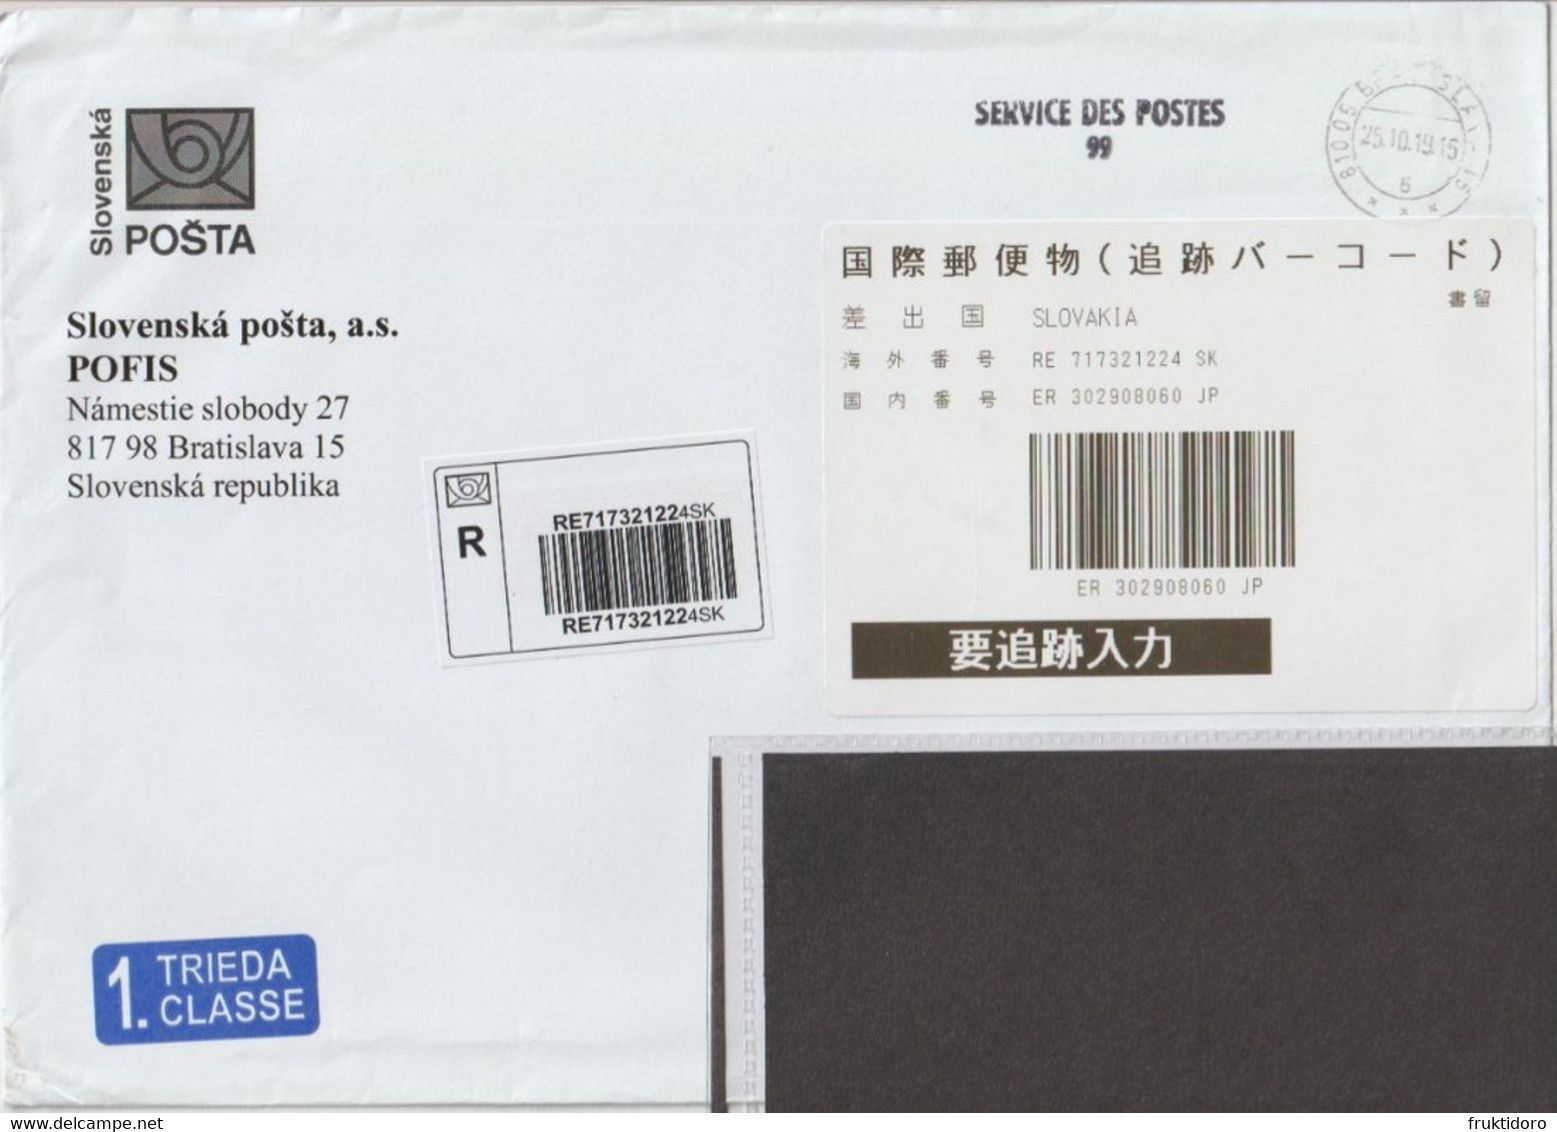 Slovakia Registered Letter From Bratislava To Japan - Barcodes From Slovakia & Japan - Circulated - 2019 - Errors, Freaks & Oddities (EFO)